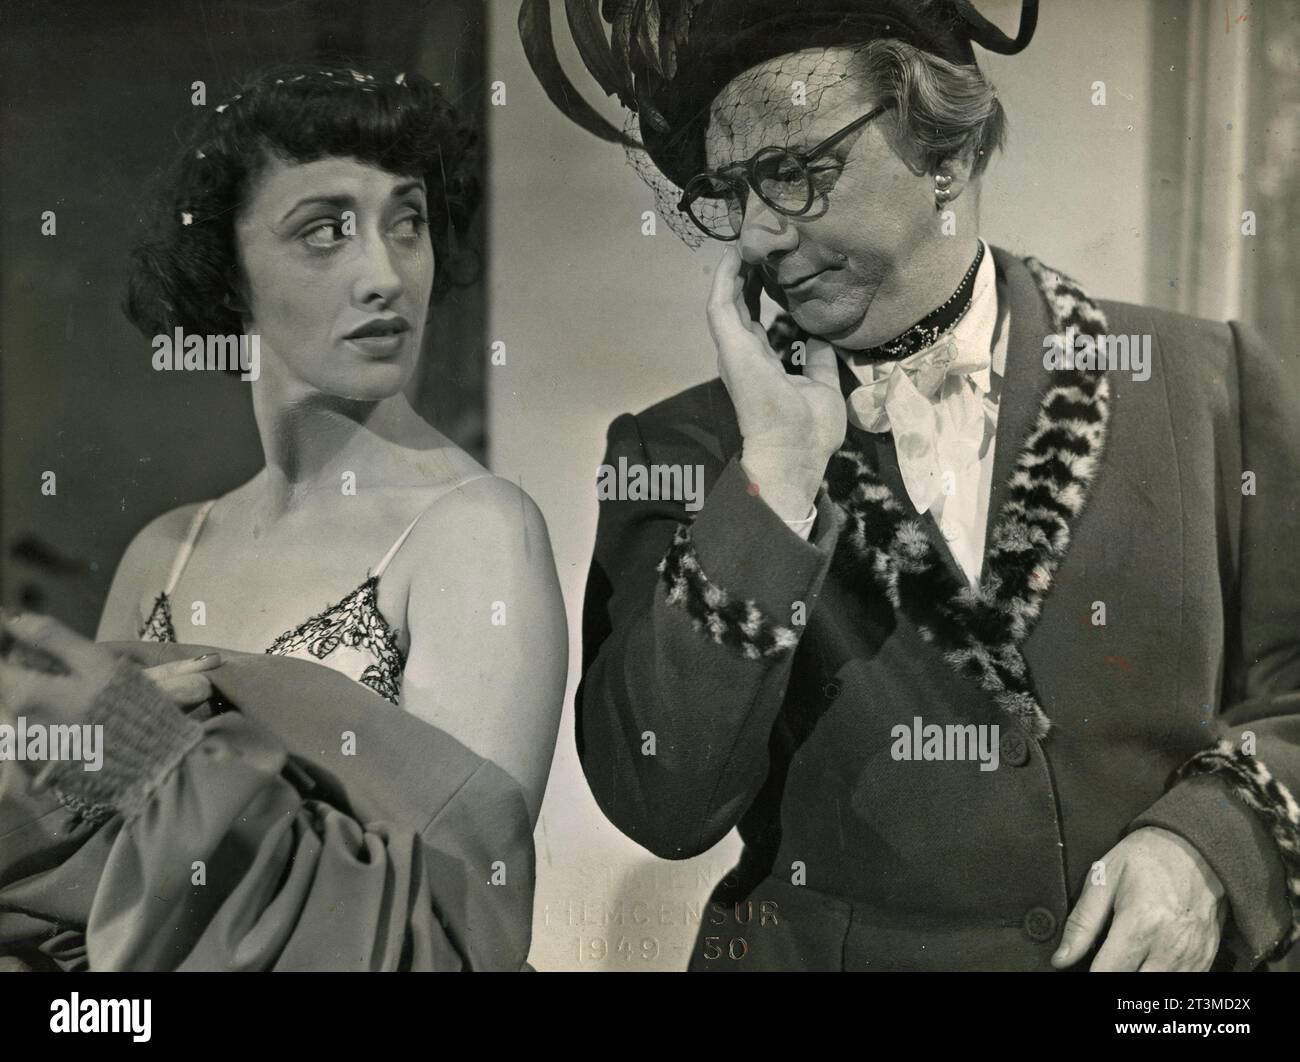 Danish actor Christian Arhoff and actress Vera Gebuhr in the movie Lyn-Fotografen, Denmark 1950 Stock Photo